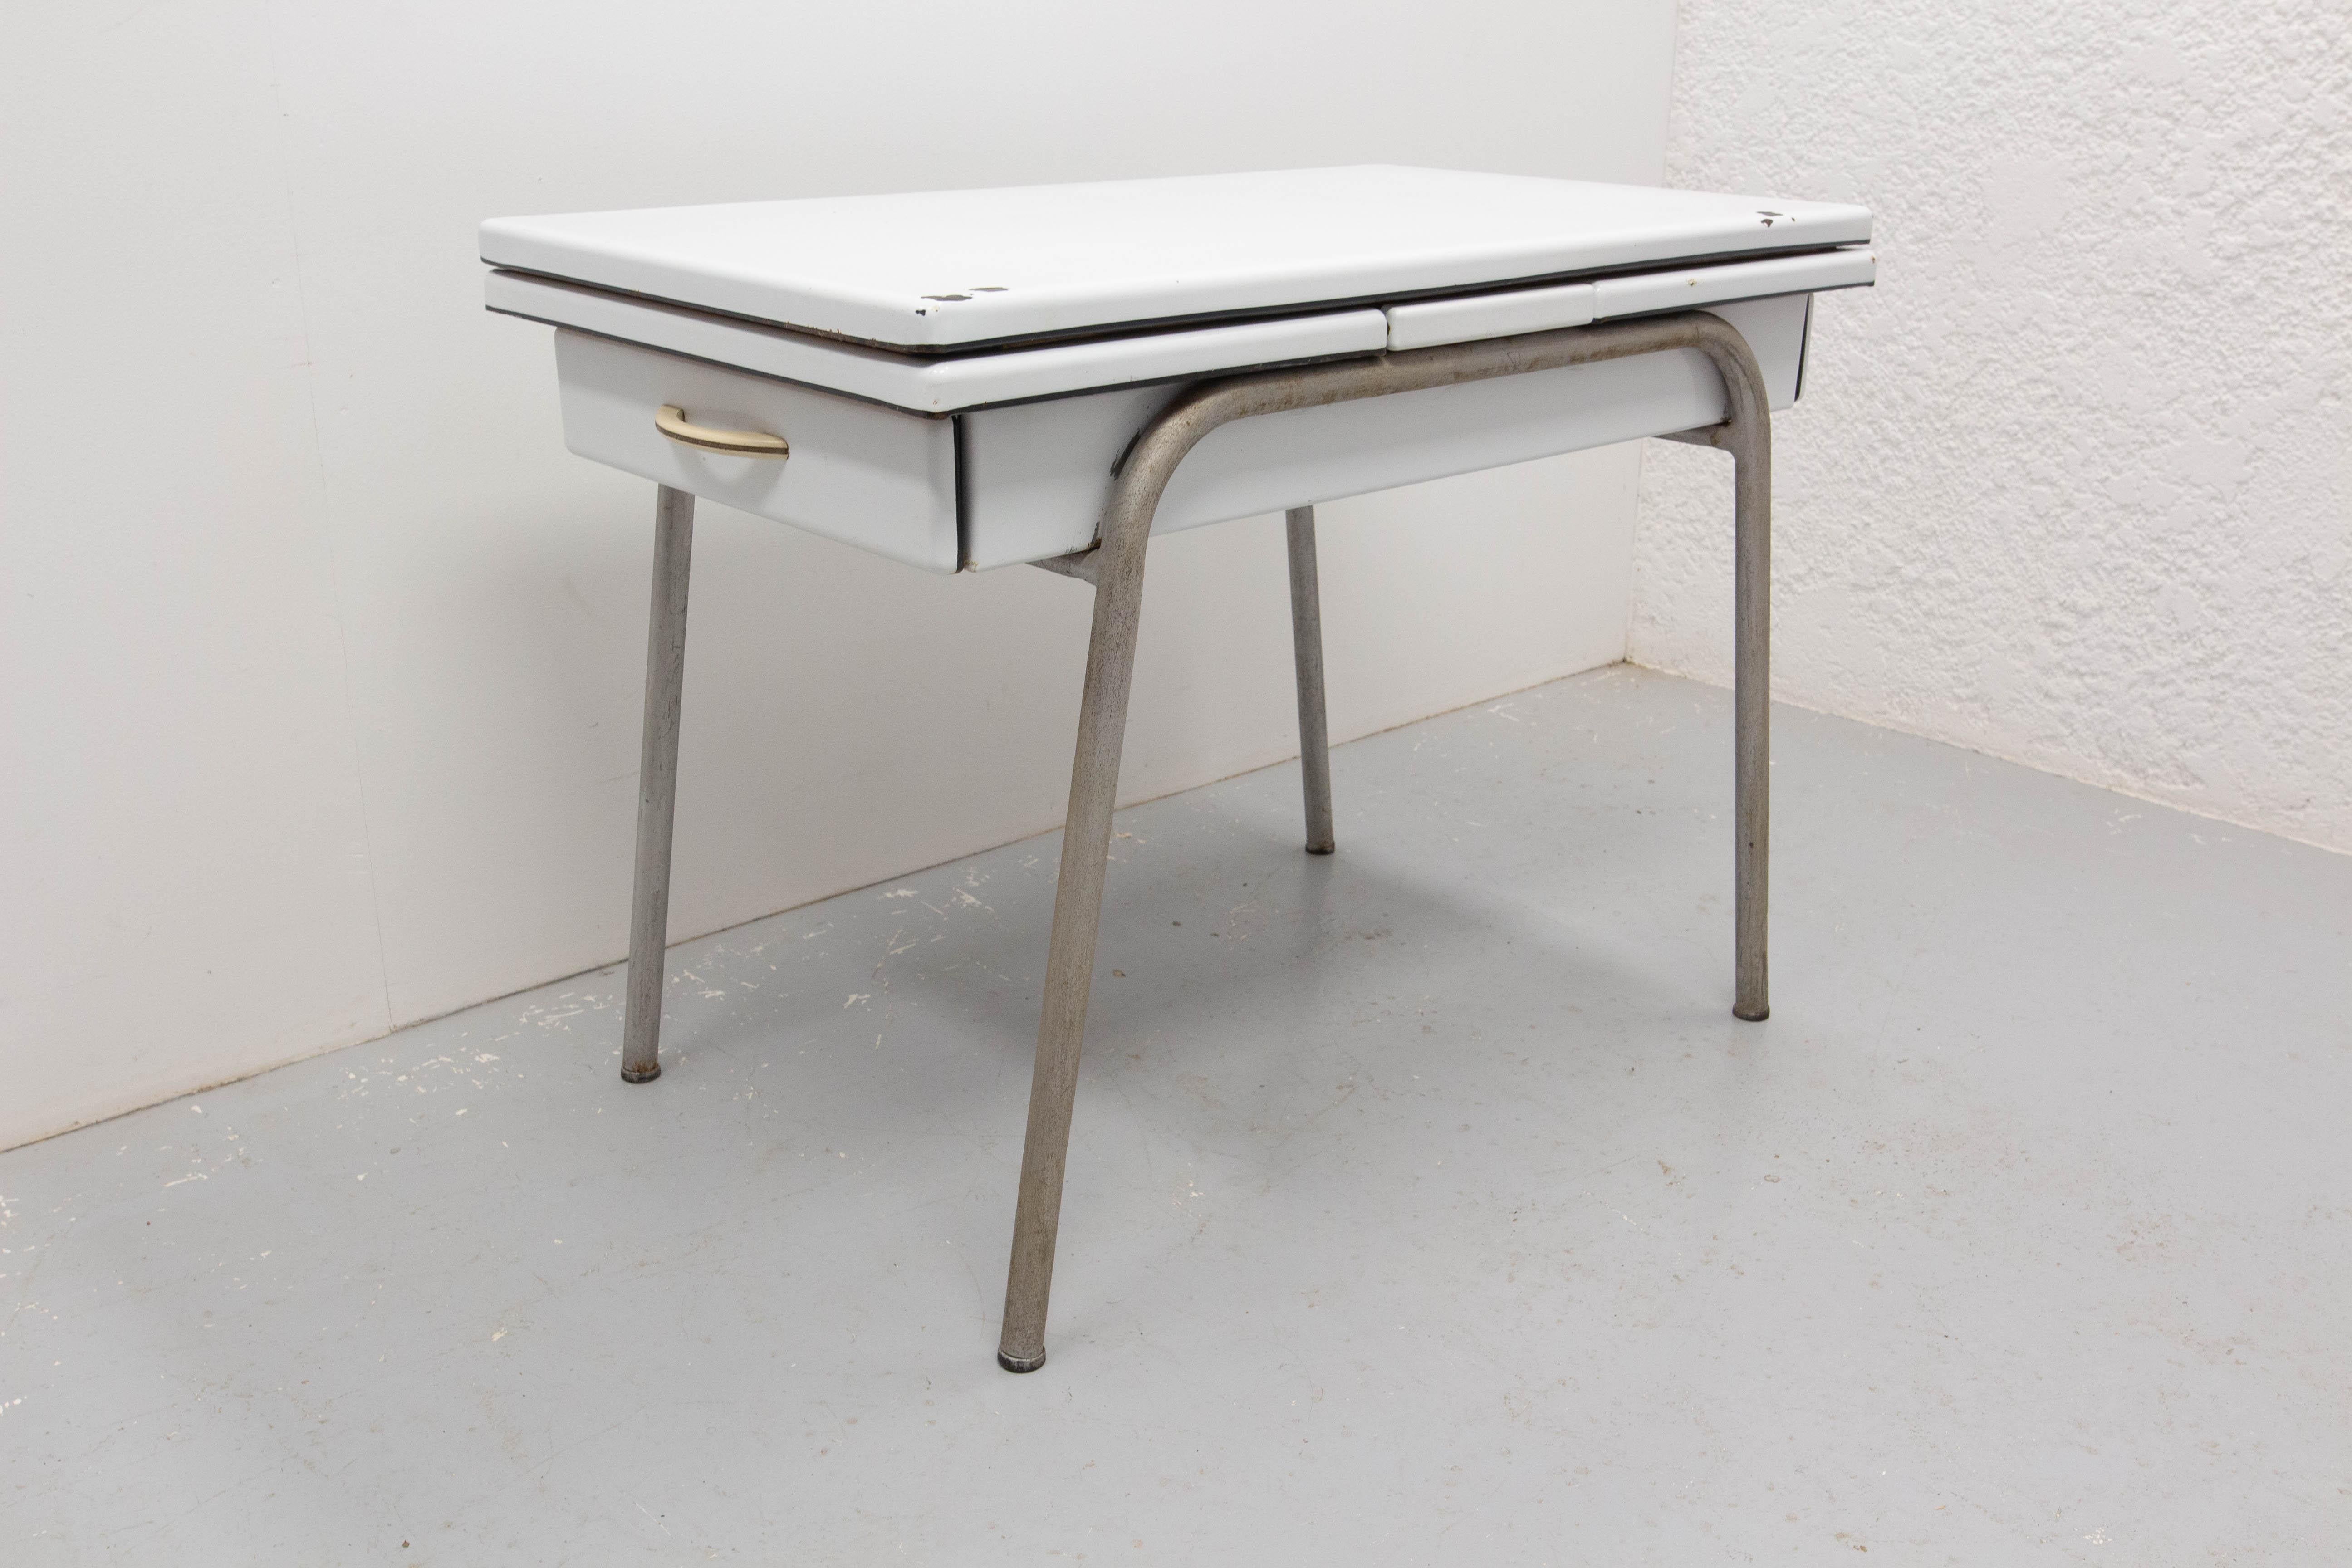 Typical of the 1950's kitchens, this french enamelled metal ans chrome table can be extented in case of last minute guests.

Dimension of the extended table: 70.08 in. (178 cm)
Good condition, few marks.

Shipping:
59 / 100 / 75 cm 40 kg
